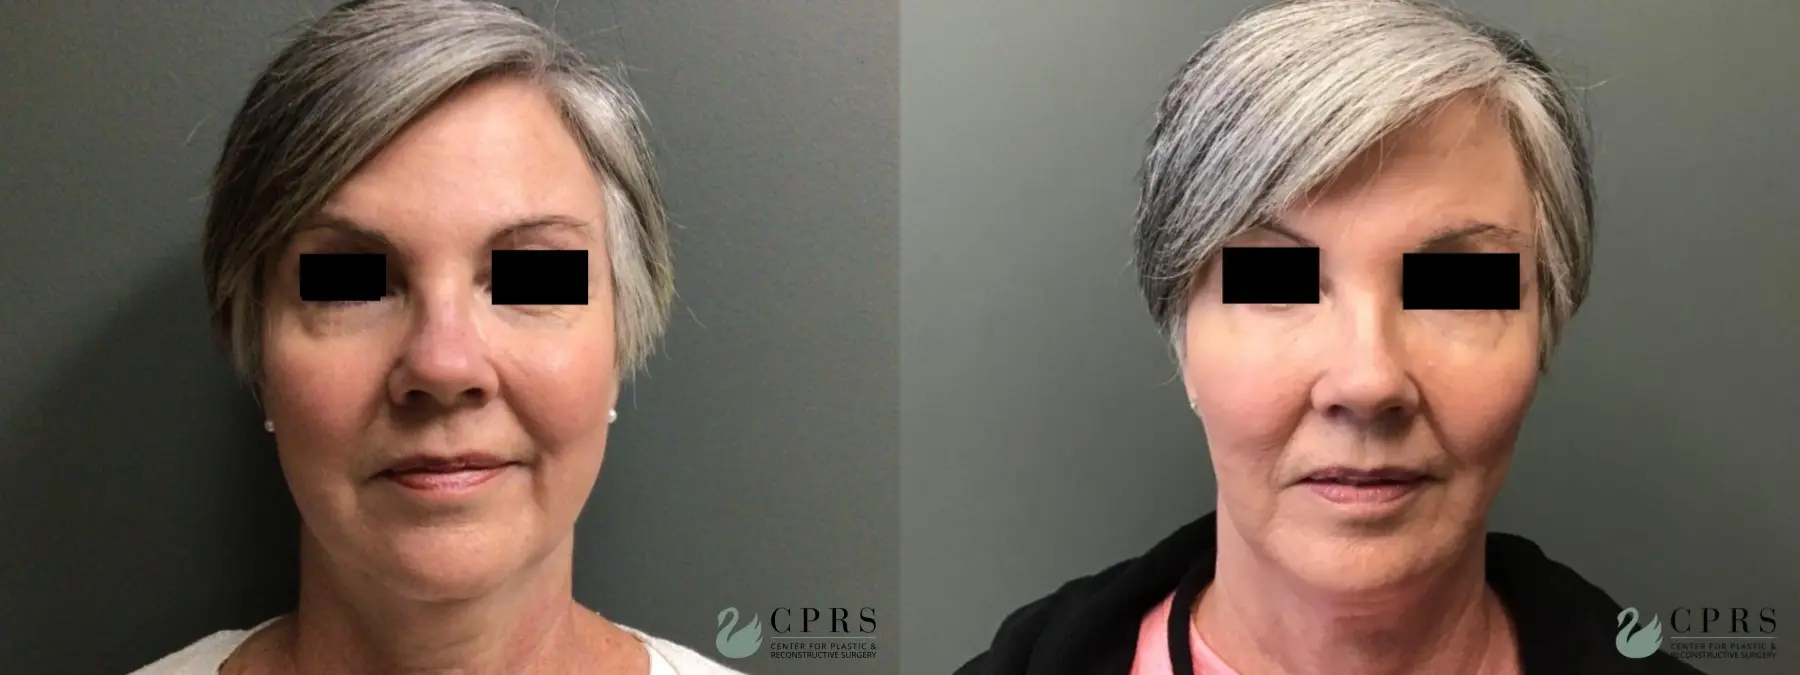 FaceTite: Patient 7 - Before and After 1